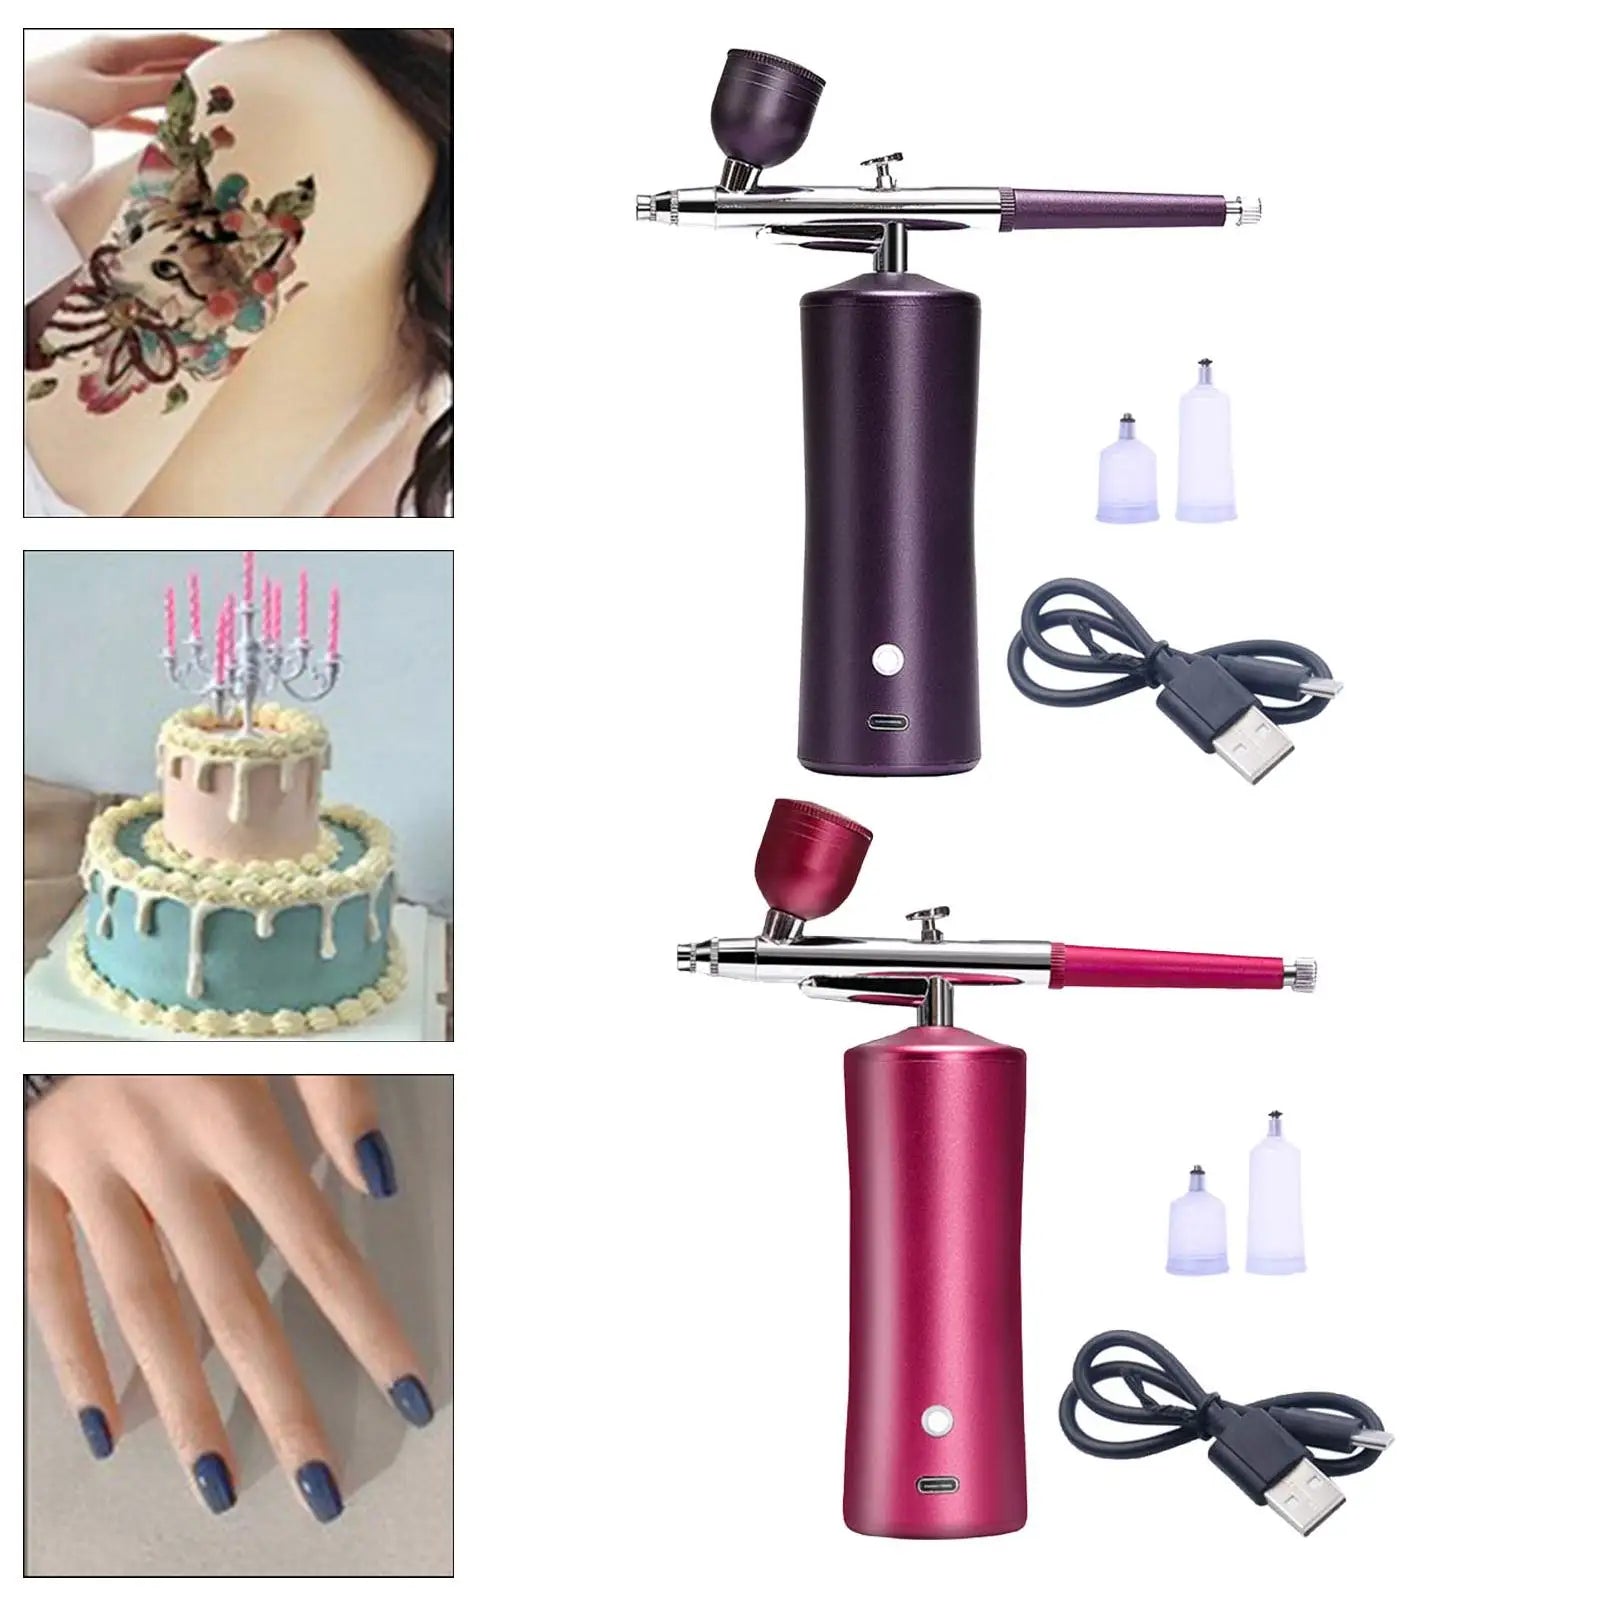 Mini Air Compressor Airbrush Spray Makeup Portable Cordless Airbrush with Air Compressor for Craft Leather